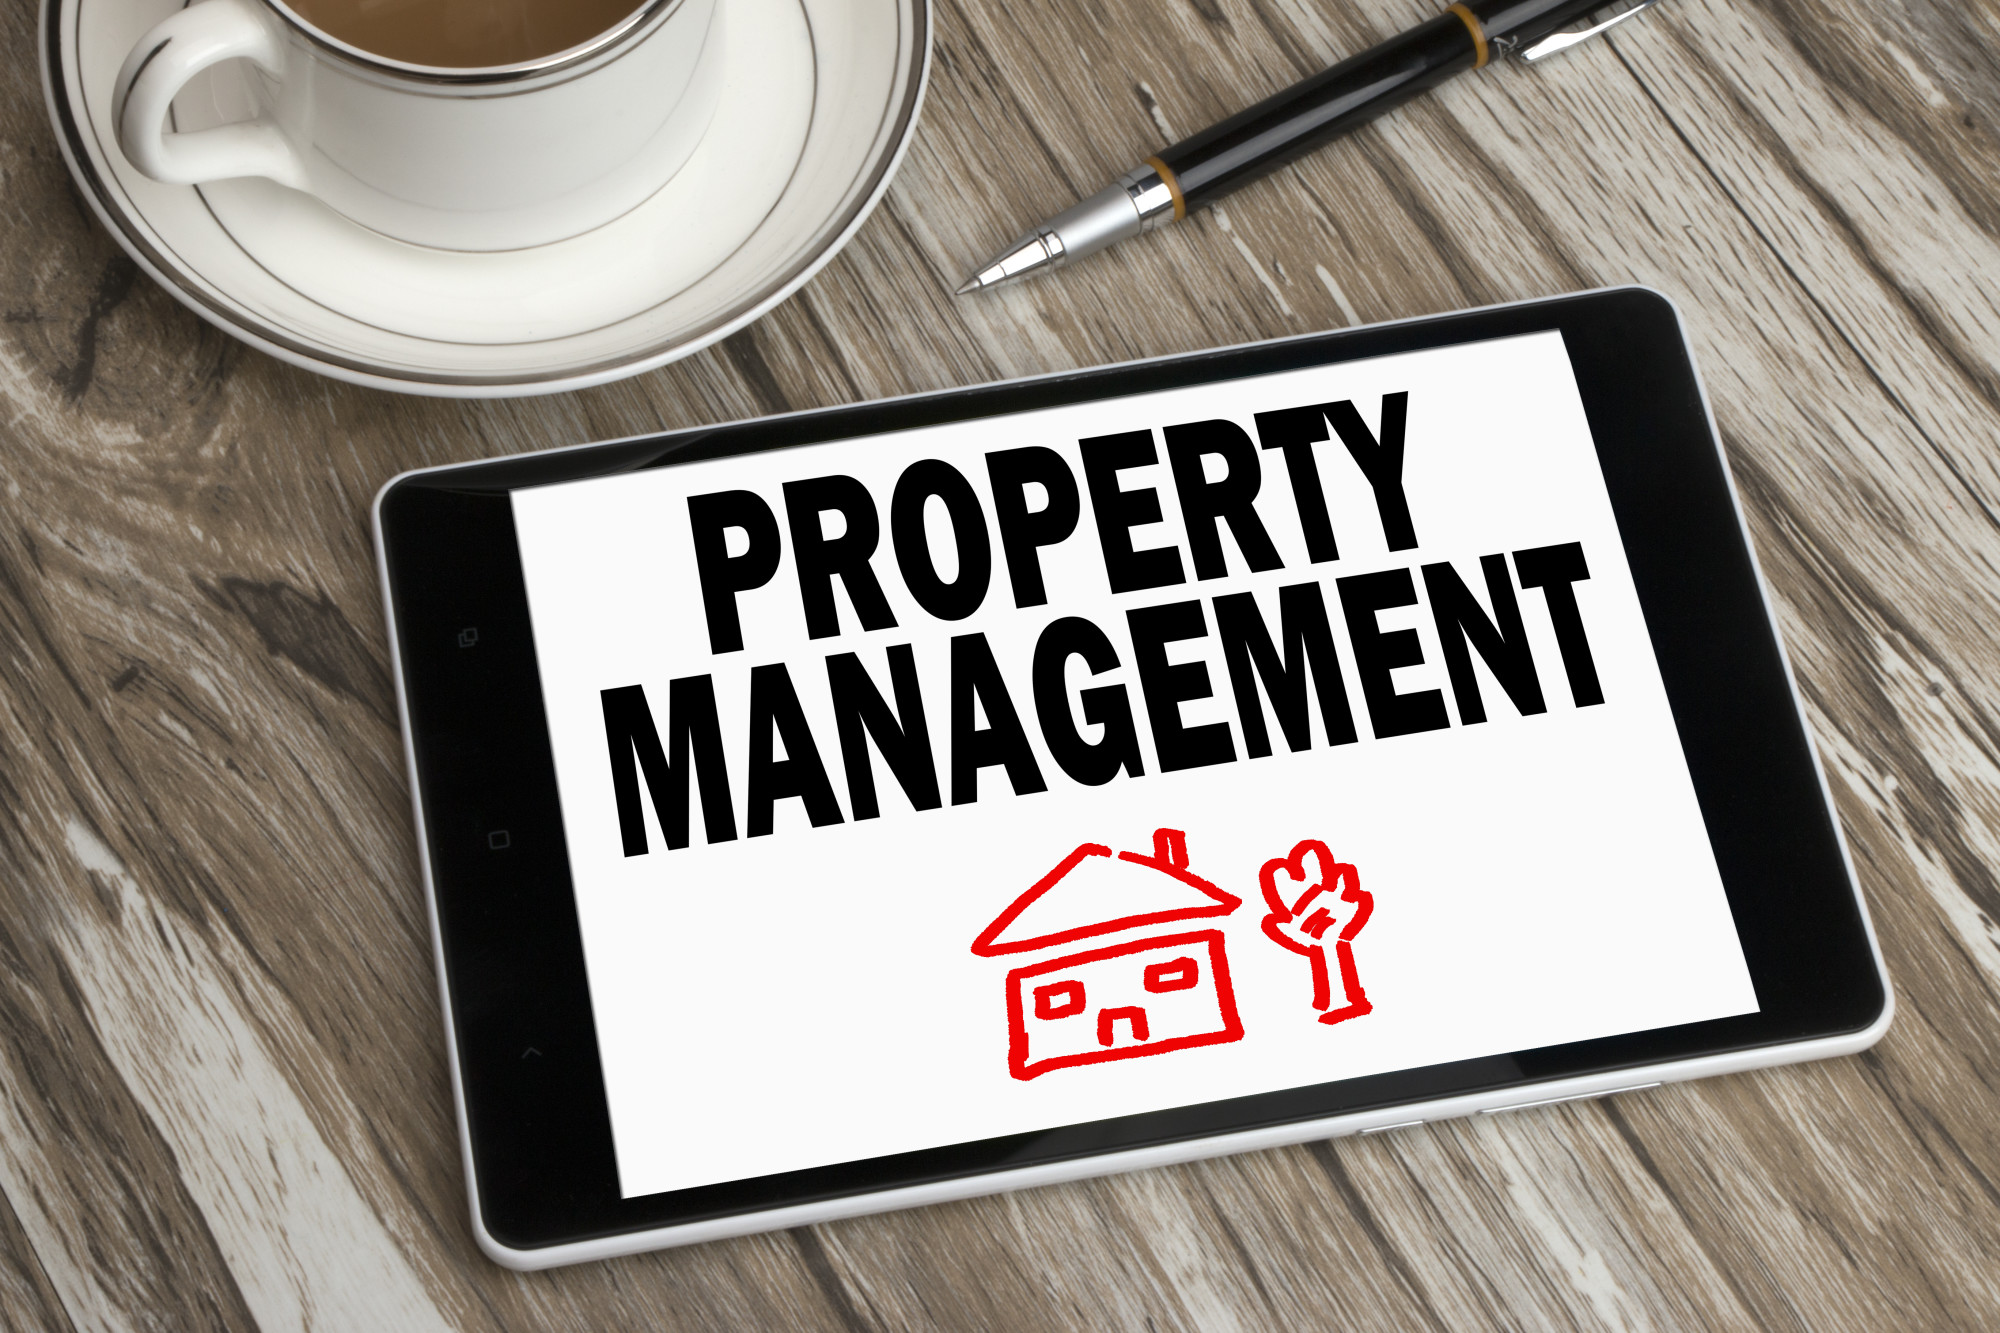 Why Should I Hire a Property Management Company in Livermore, CA?